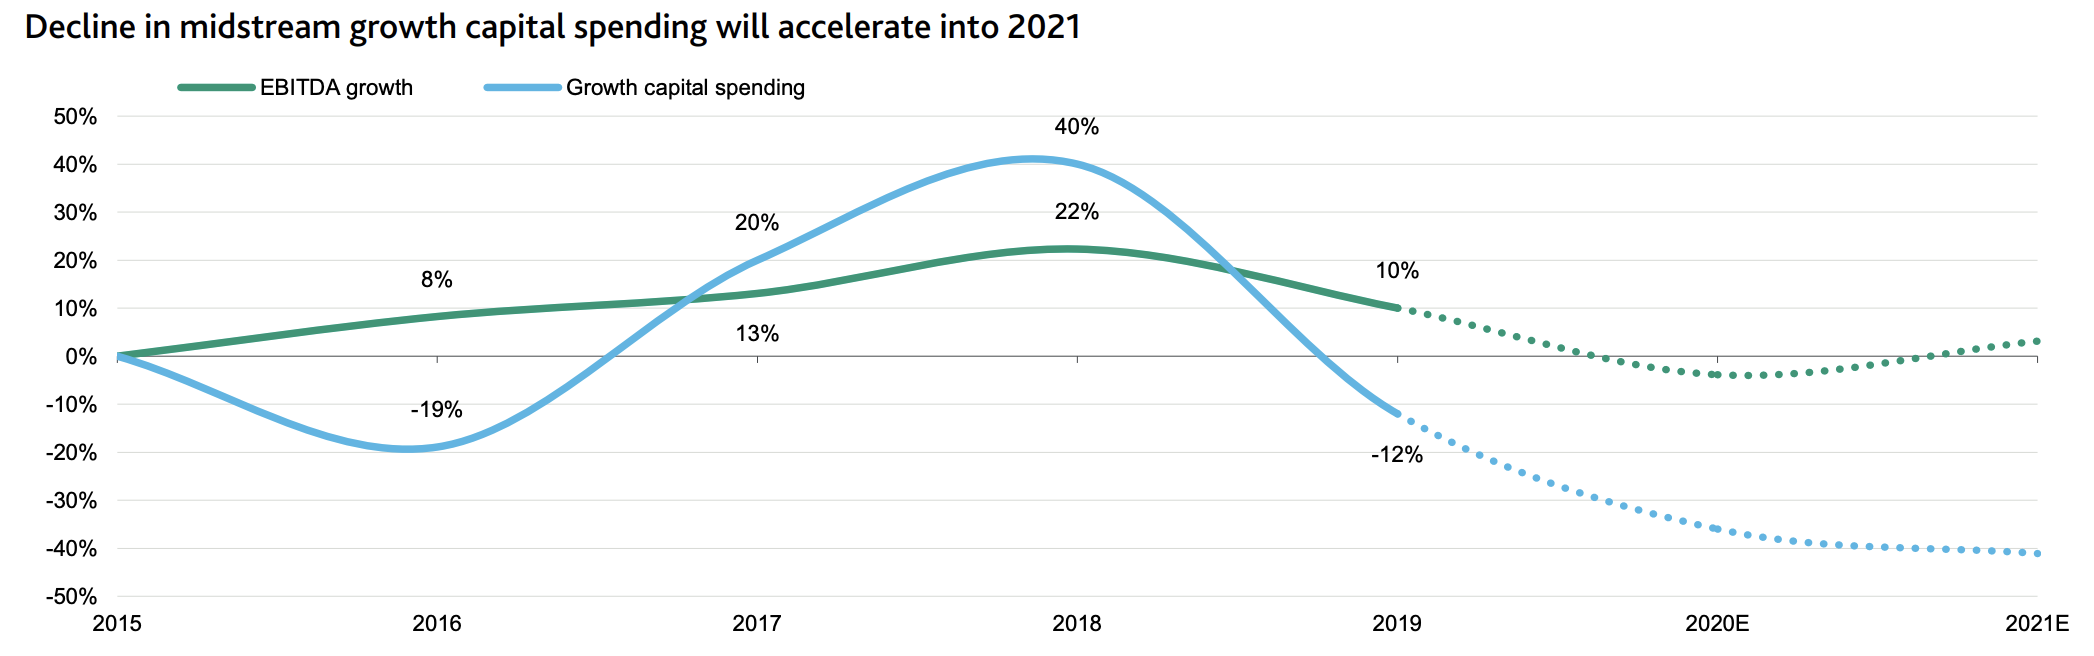 Decline in midstream growth capital spending will accelerate into 2021